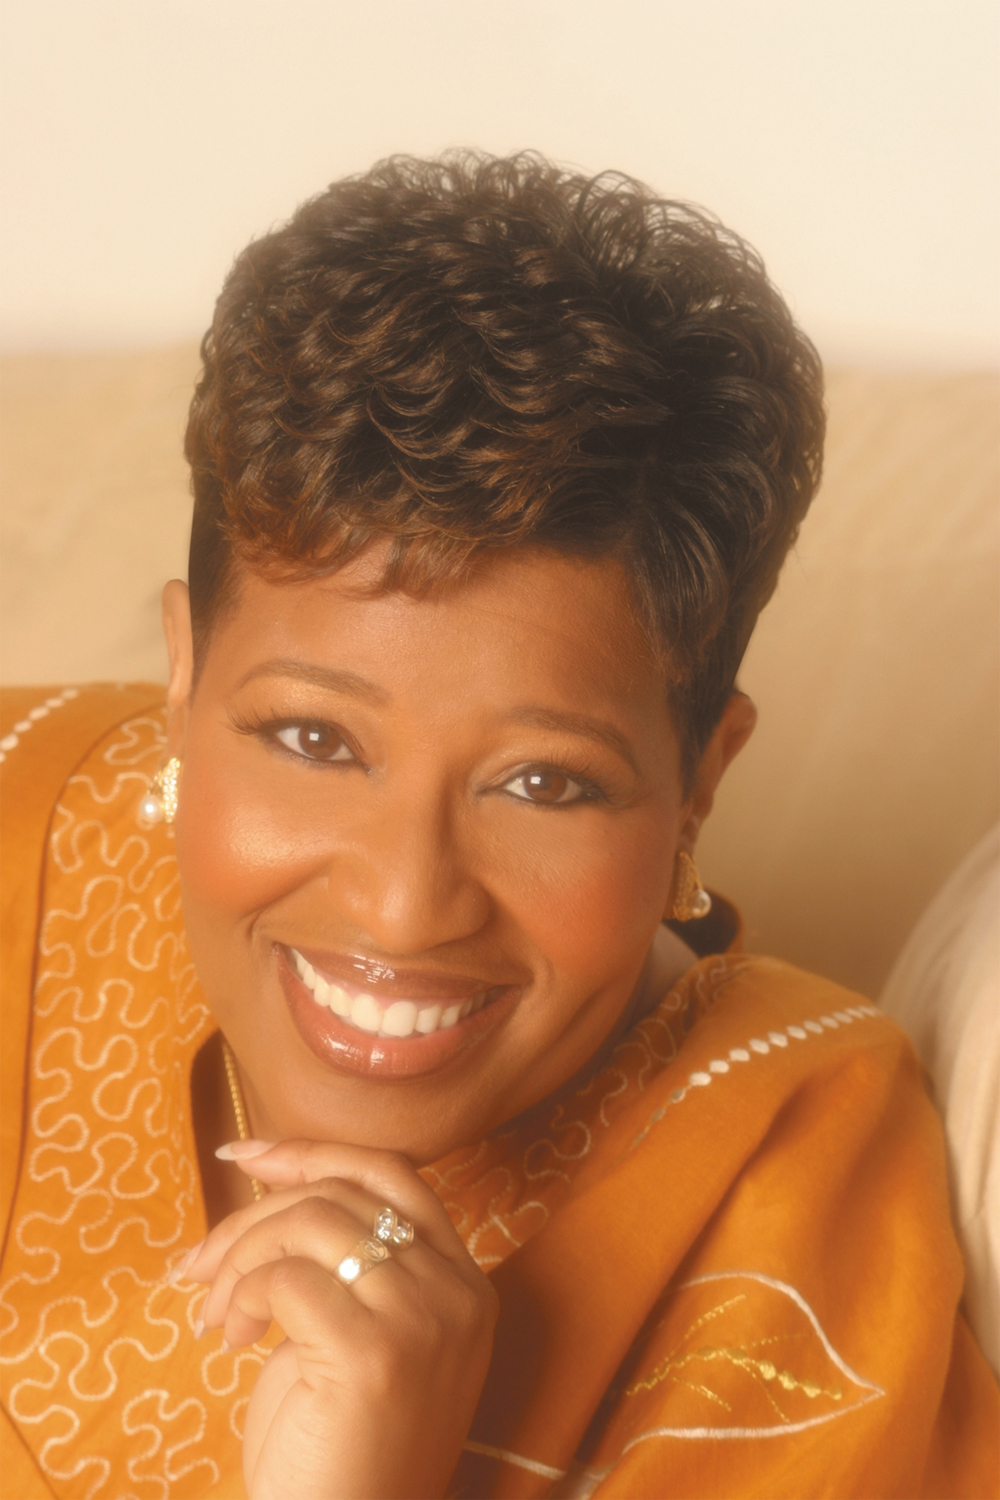 Connie Jackson or “Rev. CJ” as she is affectionately called, is a global ministry leader and prolific communicator of the Gospel. - revcj_media